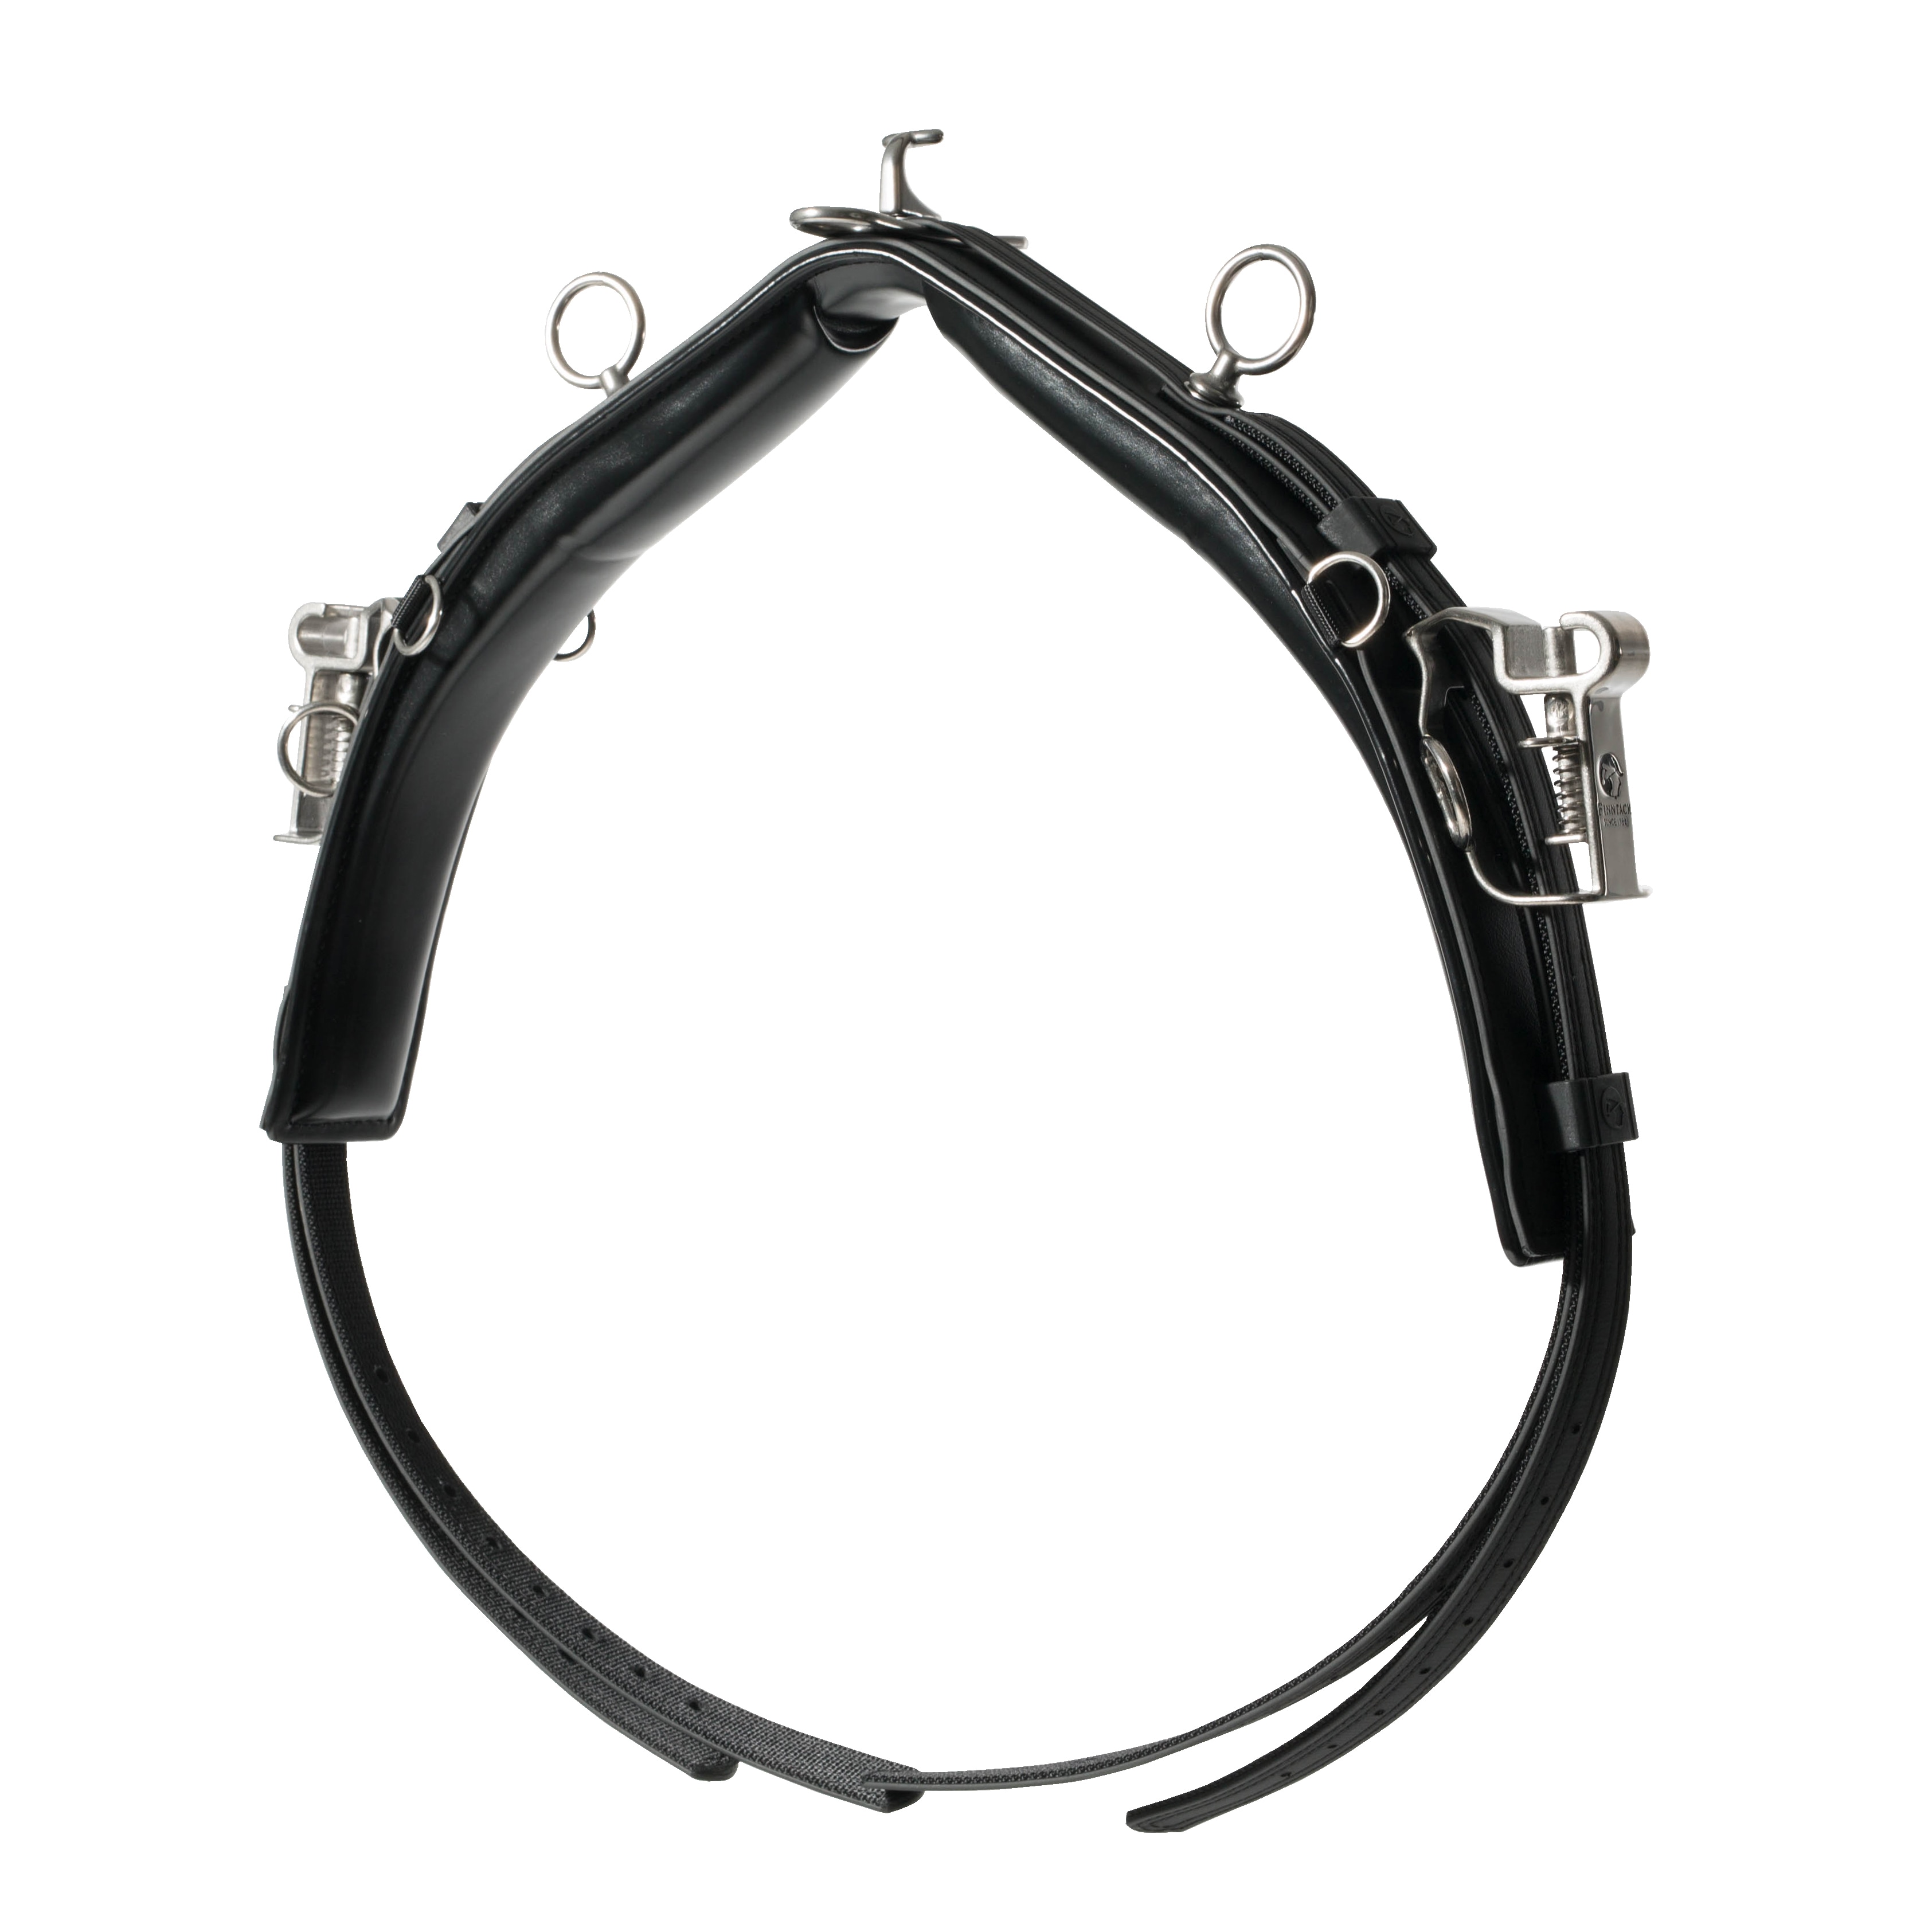 Finntack Pro QH Synthetic Pony Harness Saddle